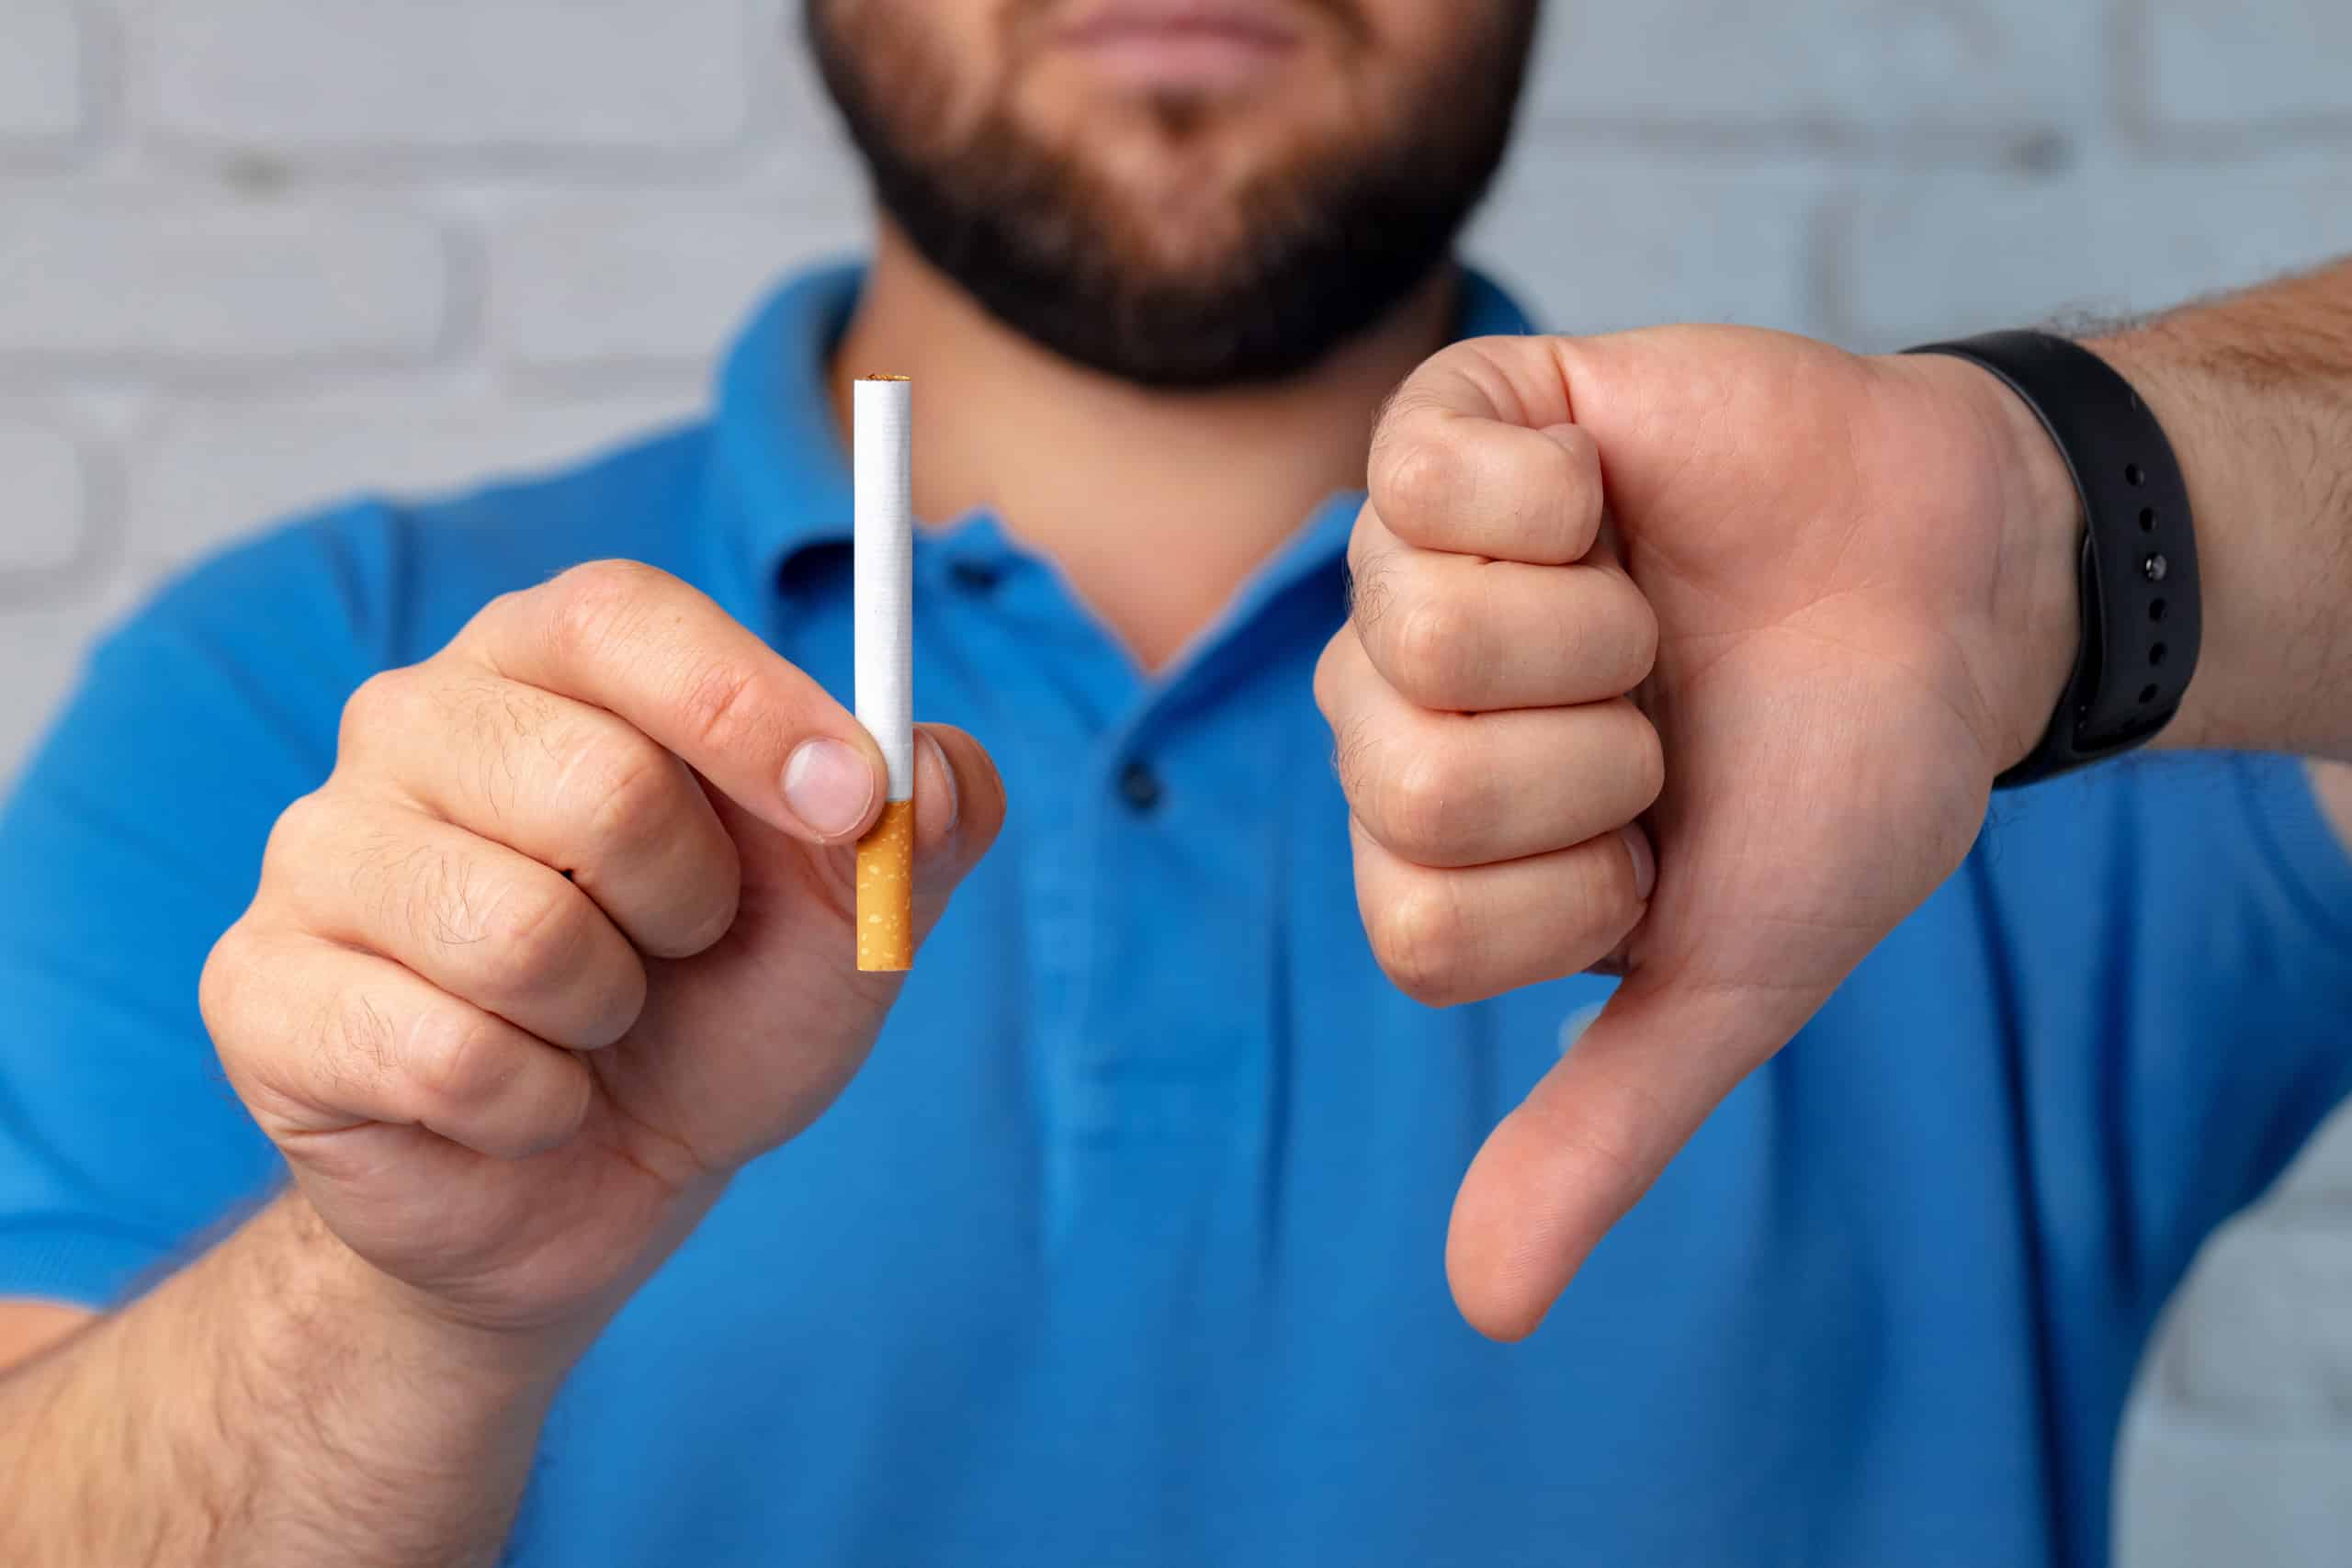 The Safety and Effectiveness of Nicotine Replacement Therapy